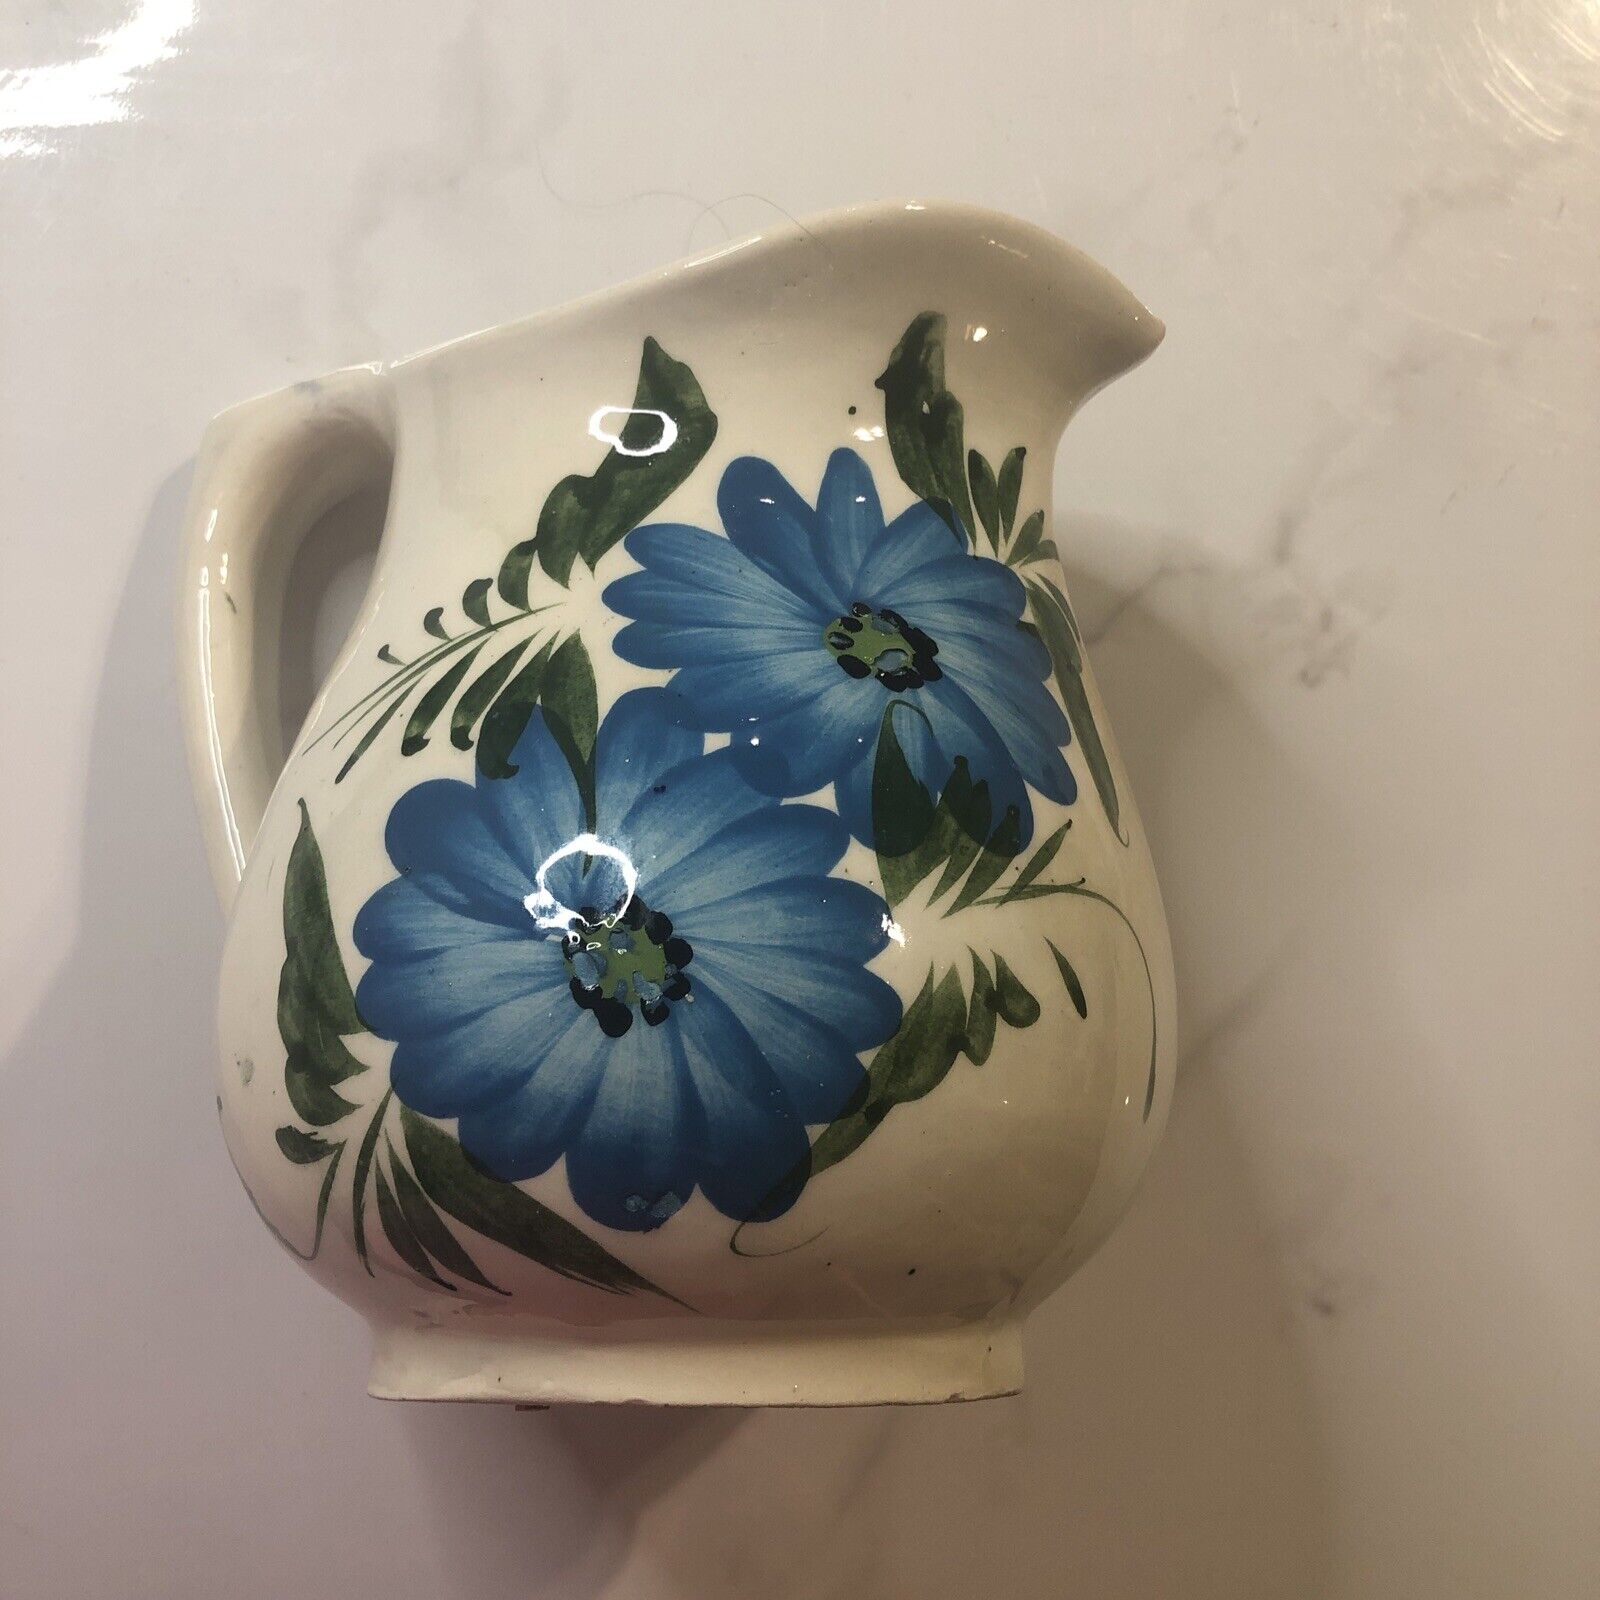 Vintage Blue Daisy Floral Pitcher Rustic For Decor 7” Tall